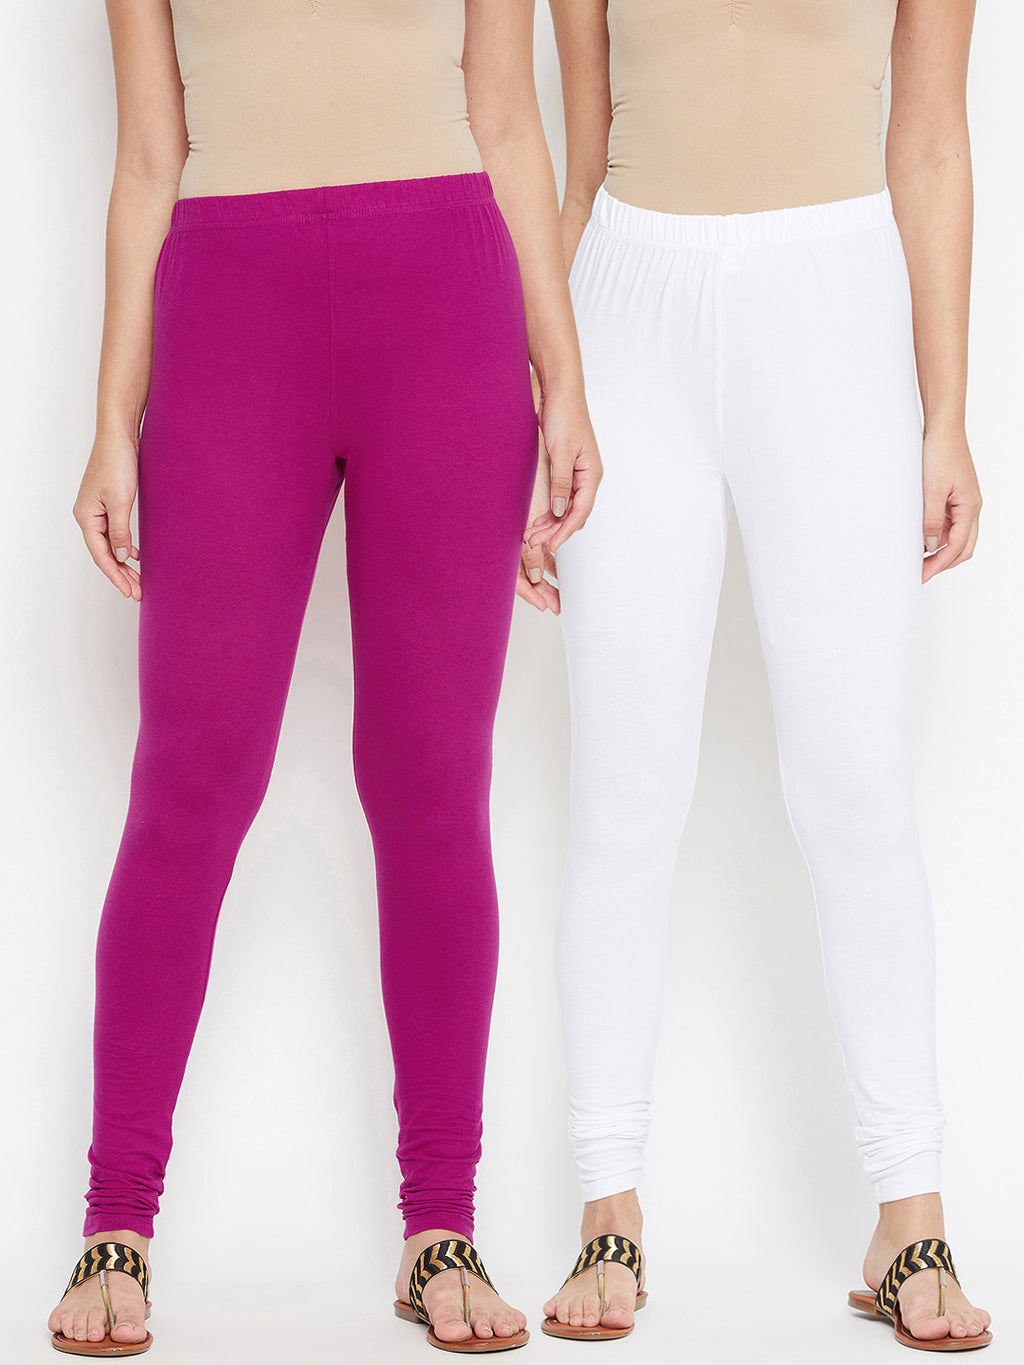 Buy ATLANS CLOTHS Pink and White Churidar Leggings for Active